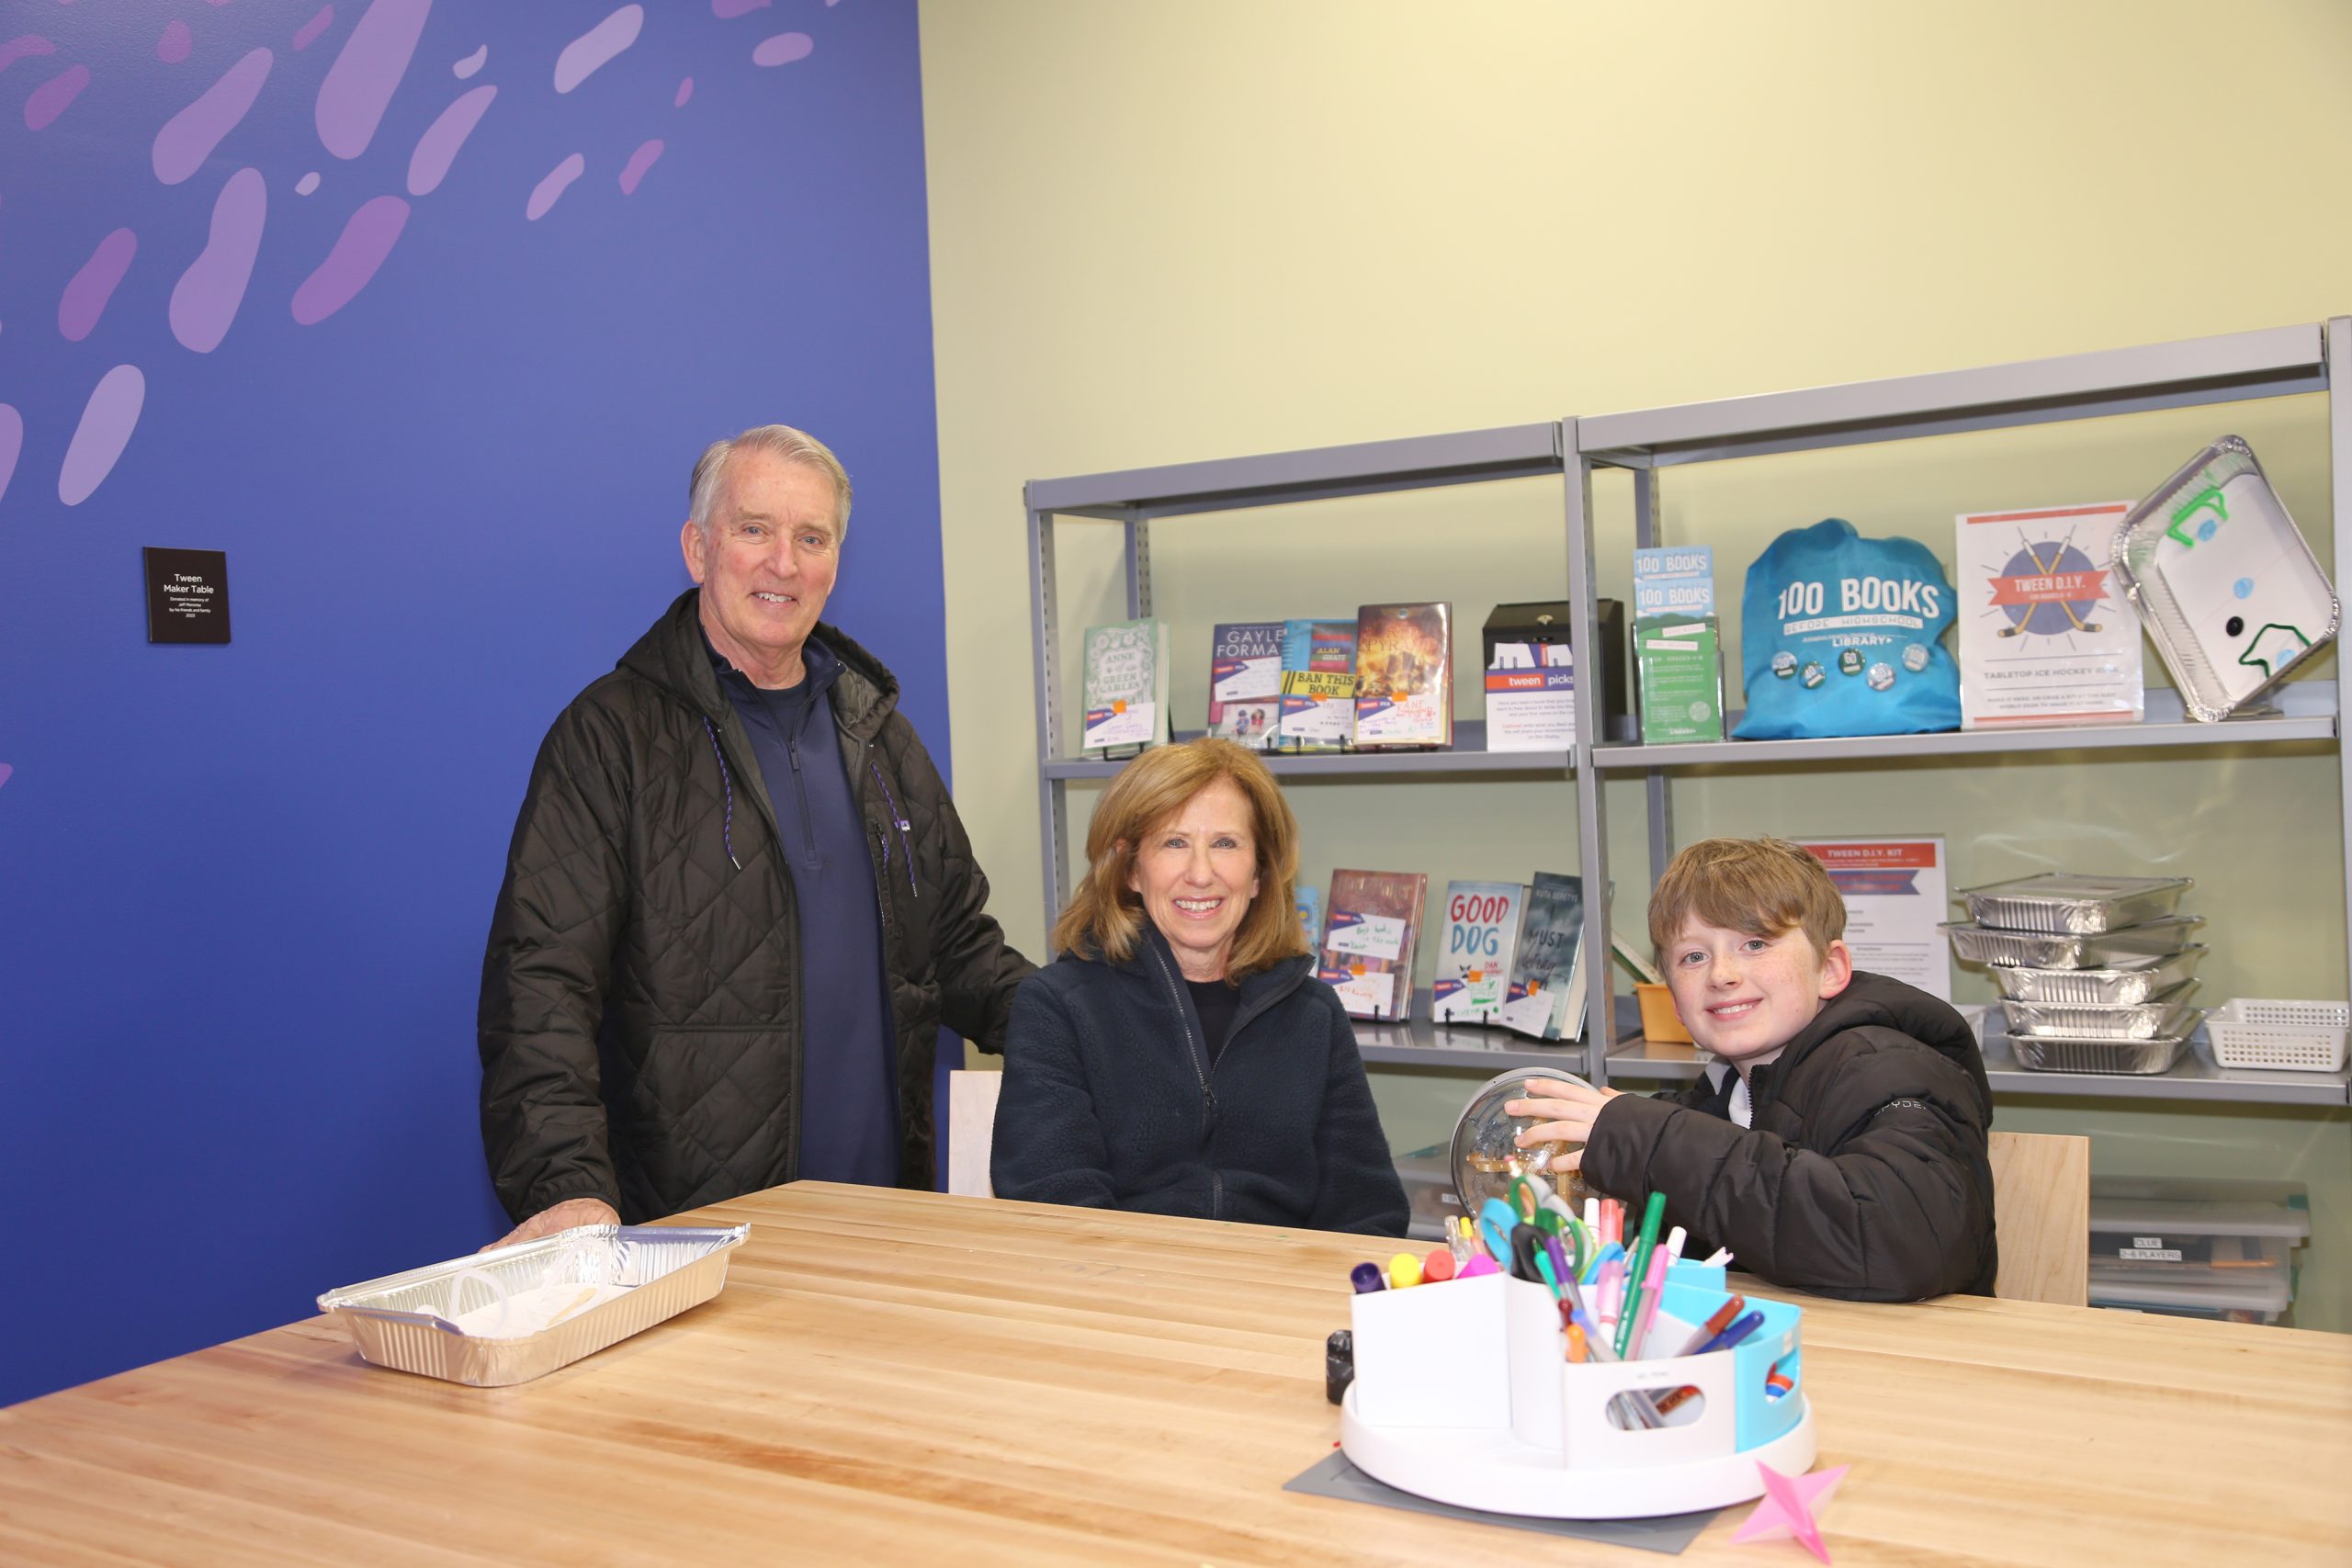 Family Donation Brings Tween Maker Space to Life